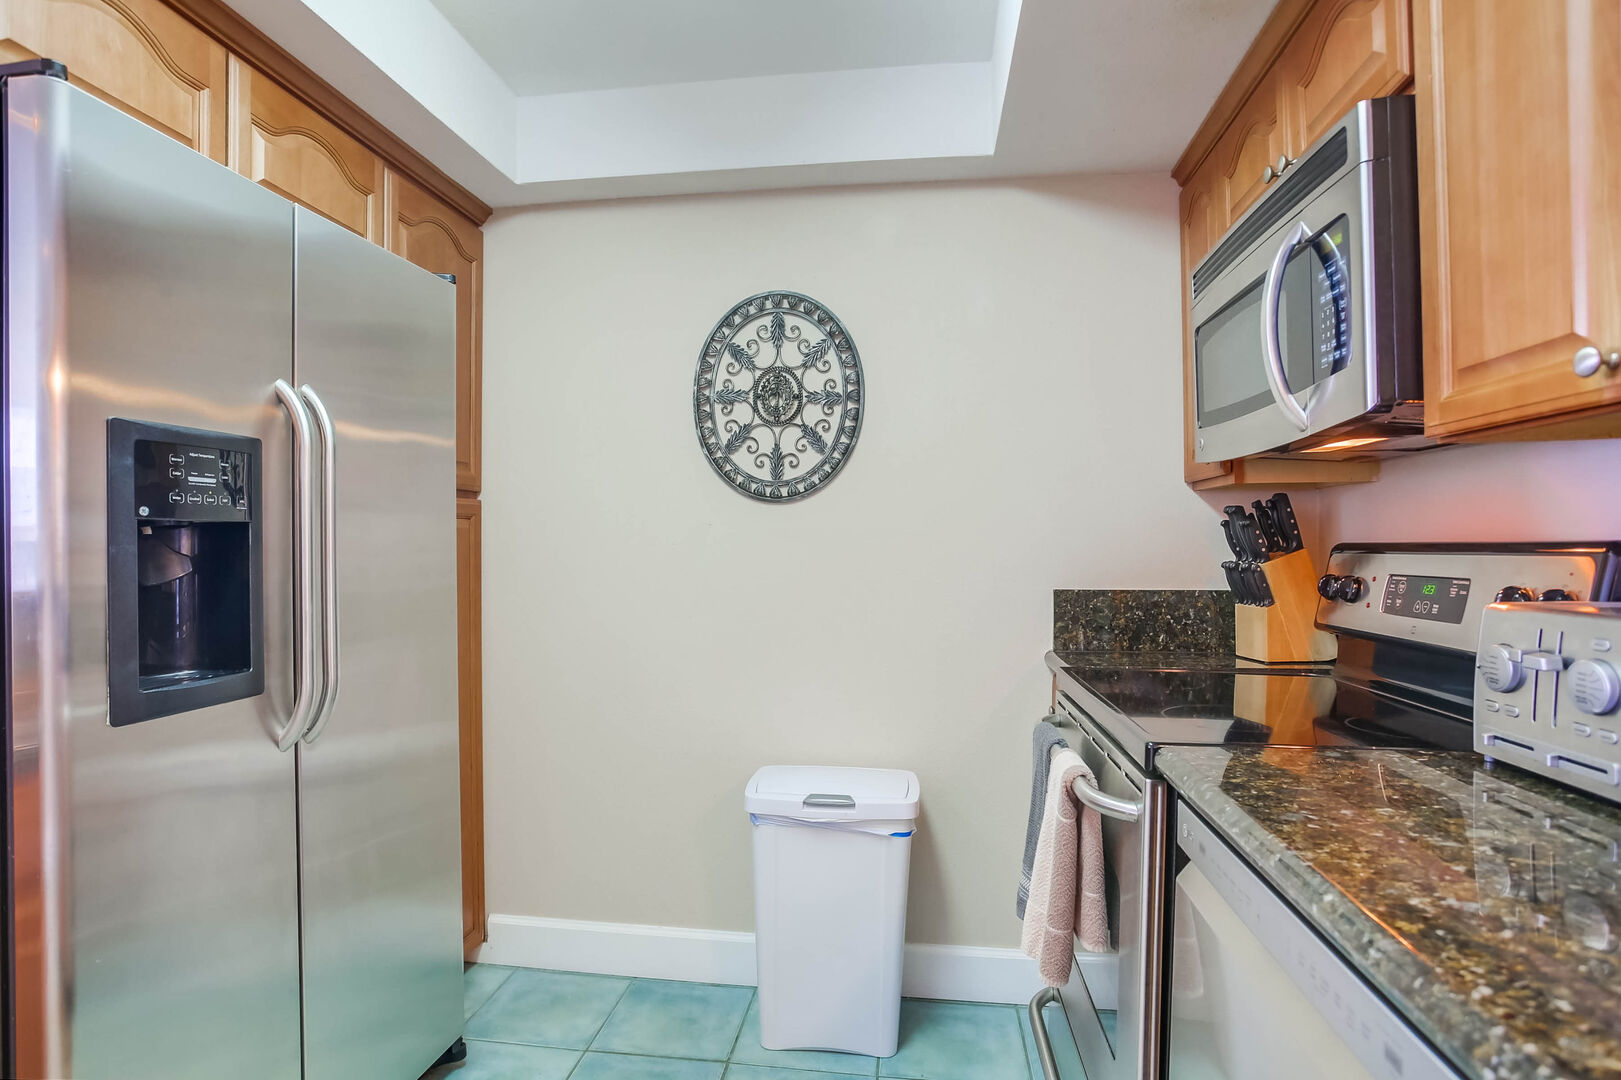 Kitchen with stainless steel appliances, granite countertops, coffee maker, toaster, blender, sink